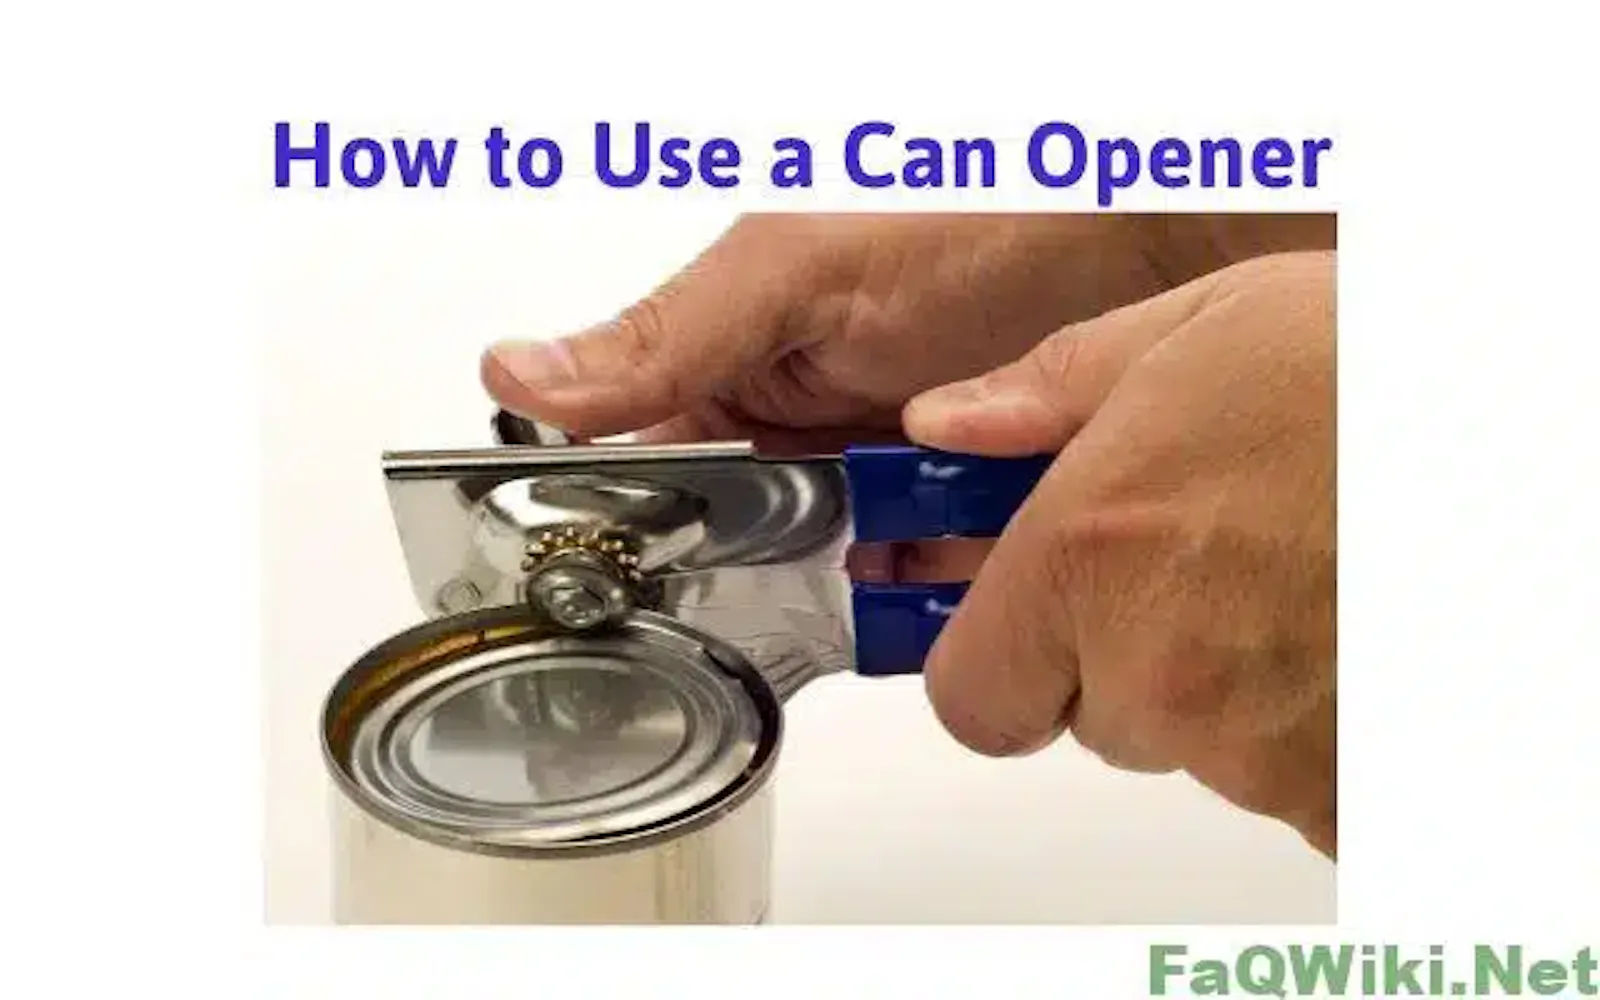 Manual Can Opener vs Electric Can Opener - Which Should You Choose? 